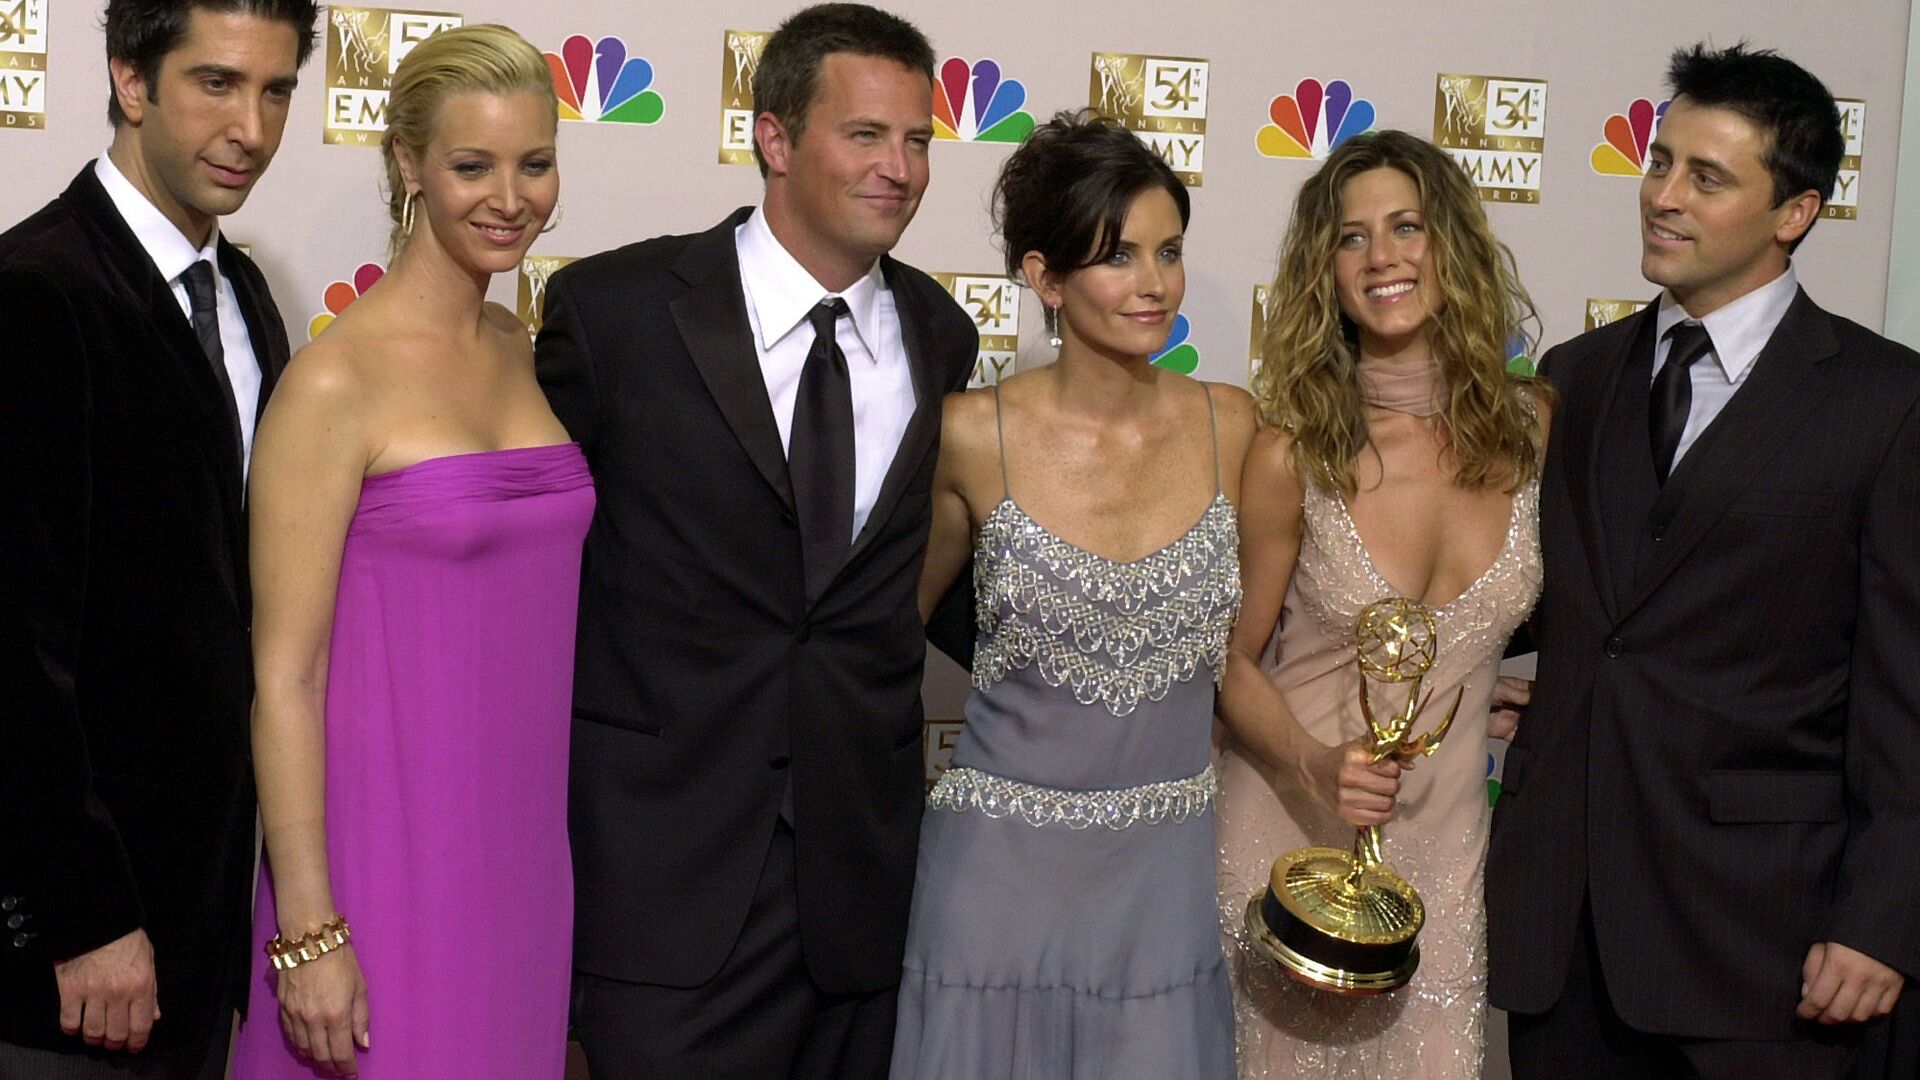 the cast of Friends, from left, David Schwimmer, Lisa Kudrow, Matthew Perry, Courteney Cox, Jennifer Aniston and Matt LeBlanc pose in the press room with the award for outstanding comedy series at the 54th annual Primetime Emmy Awards in Los Angeles. - Sputnik International, 1920, 03.04.2021